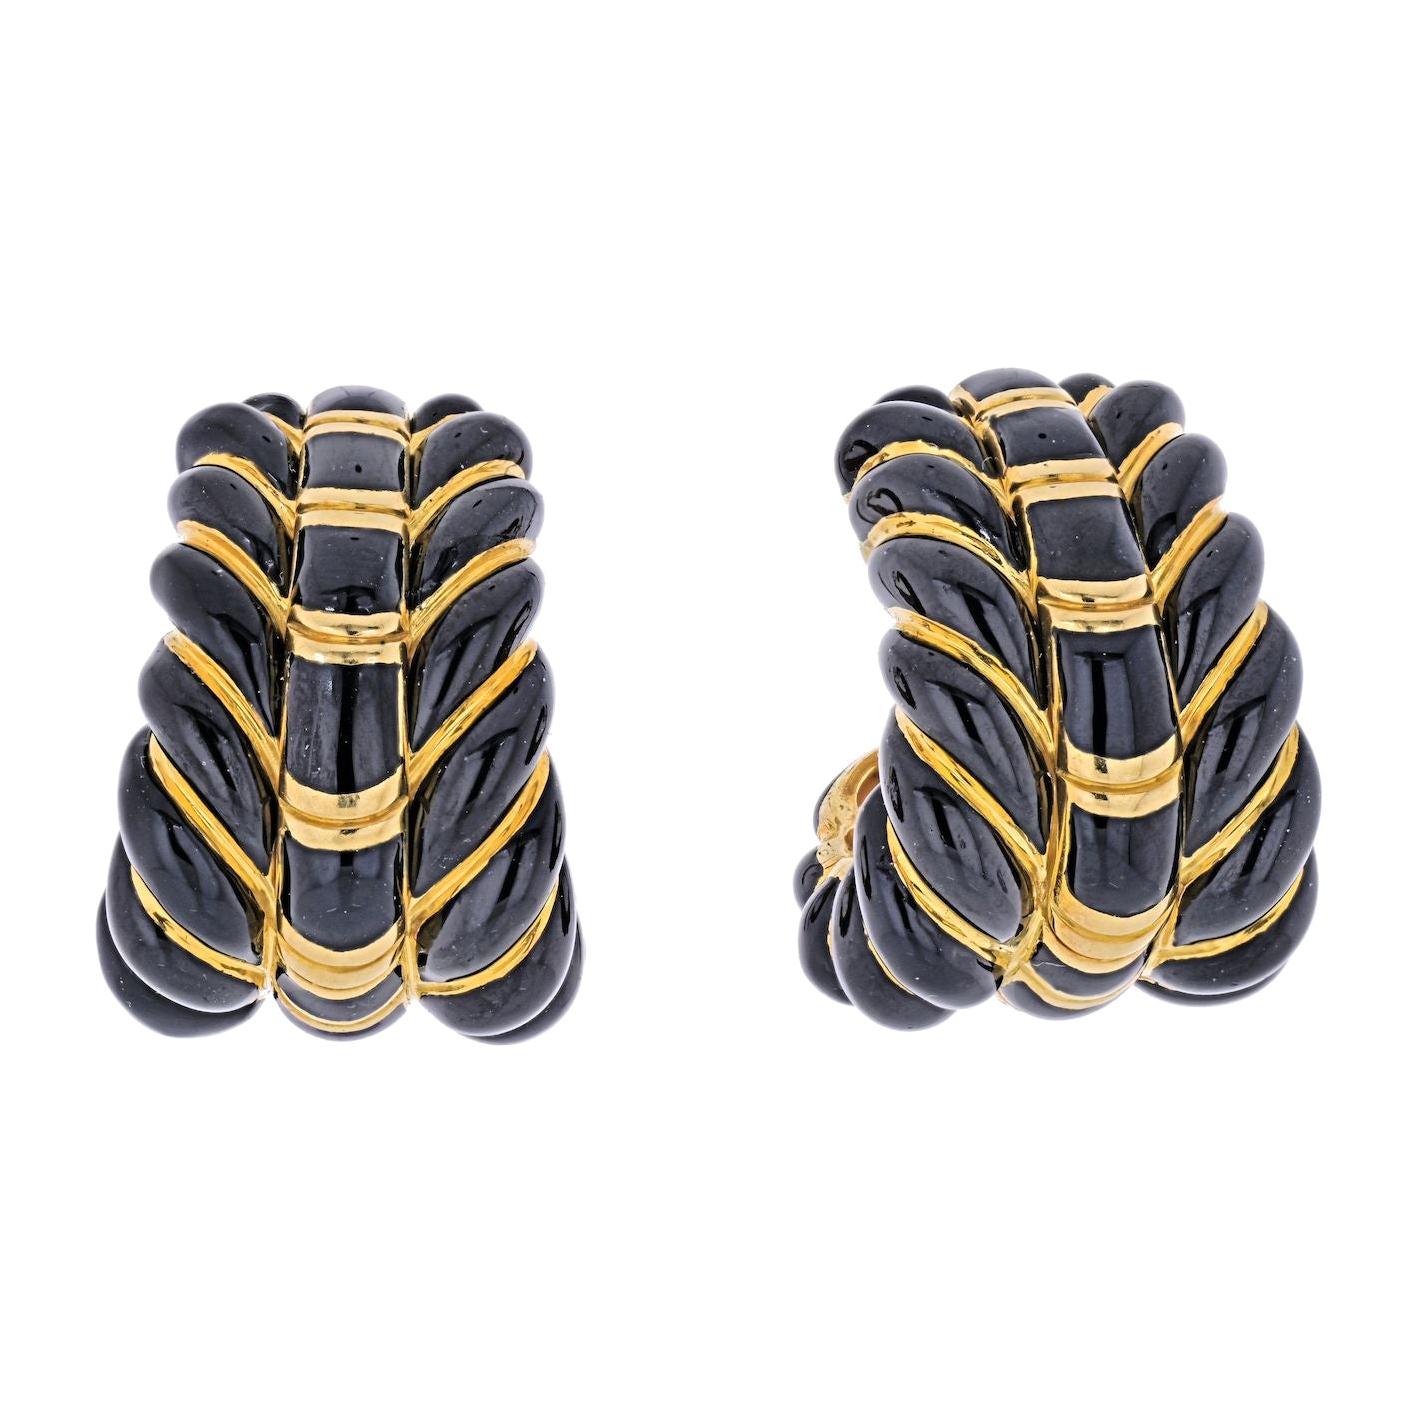 A pair of black enamel tapered hoop ear clips, David Webb. Designed as diagonal bombe bands applied with black enamel, spaced by slender gold bands.
Heavy clip-on backs. 
Crafted in 18k yellow gold. 
L: 31mm
W: from 16mm to 23mm